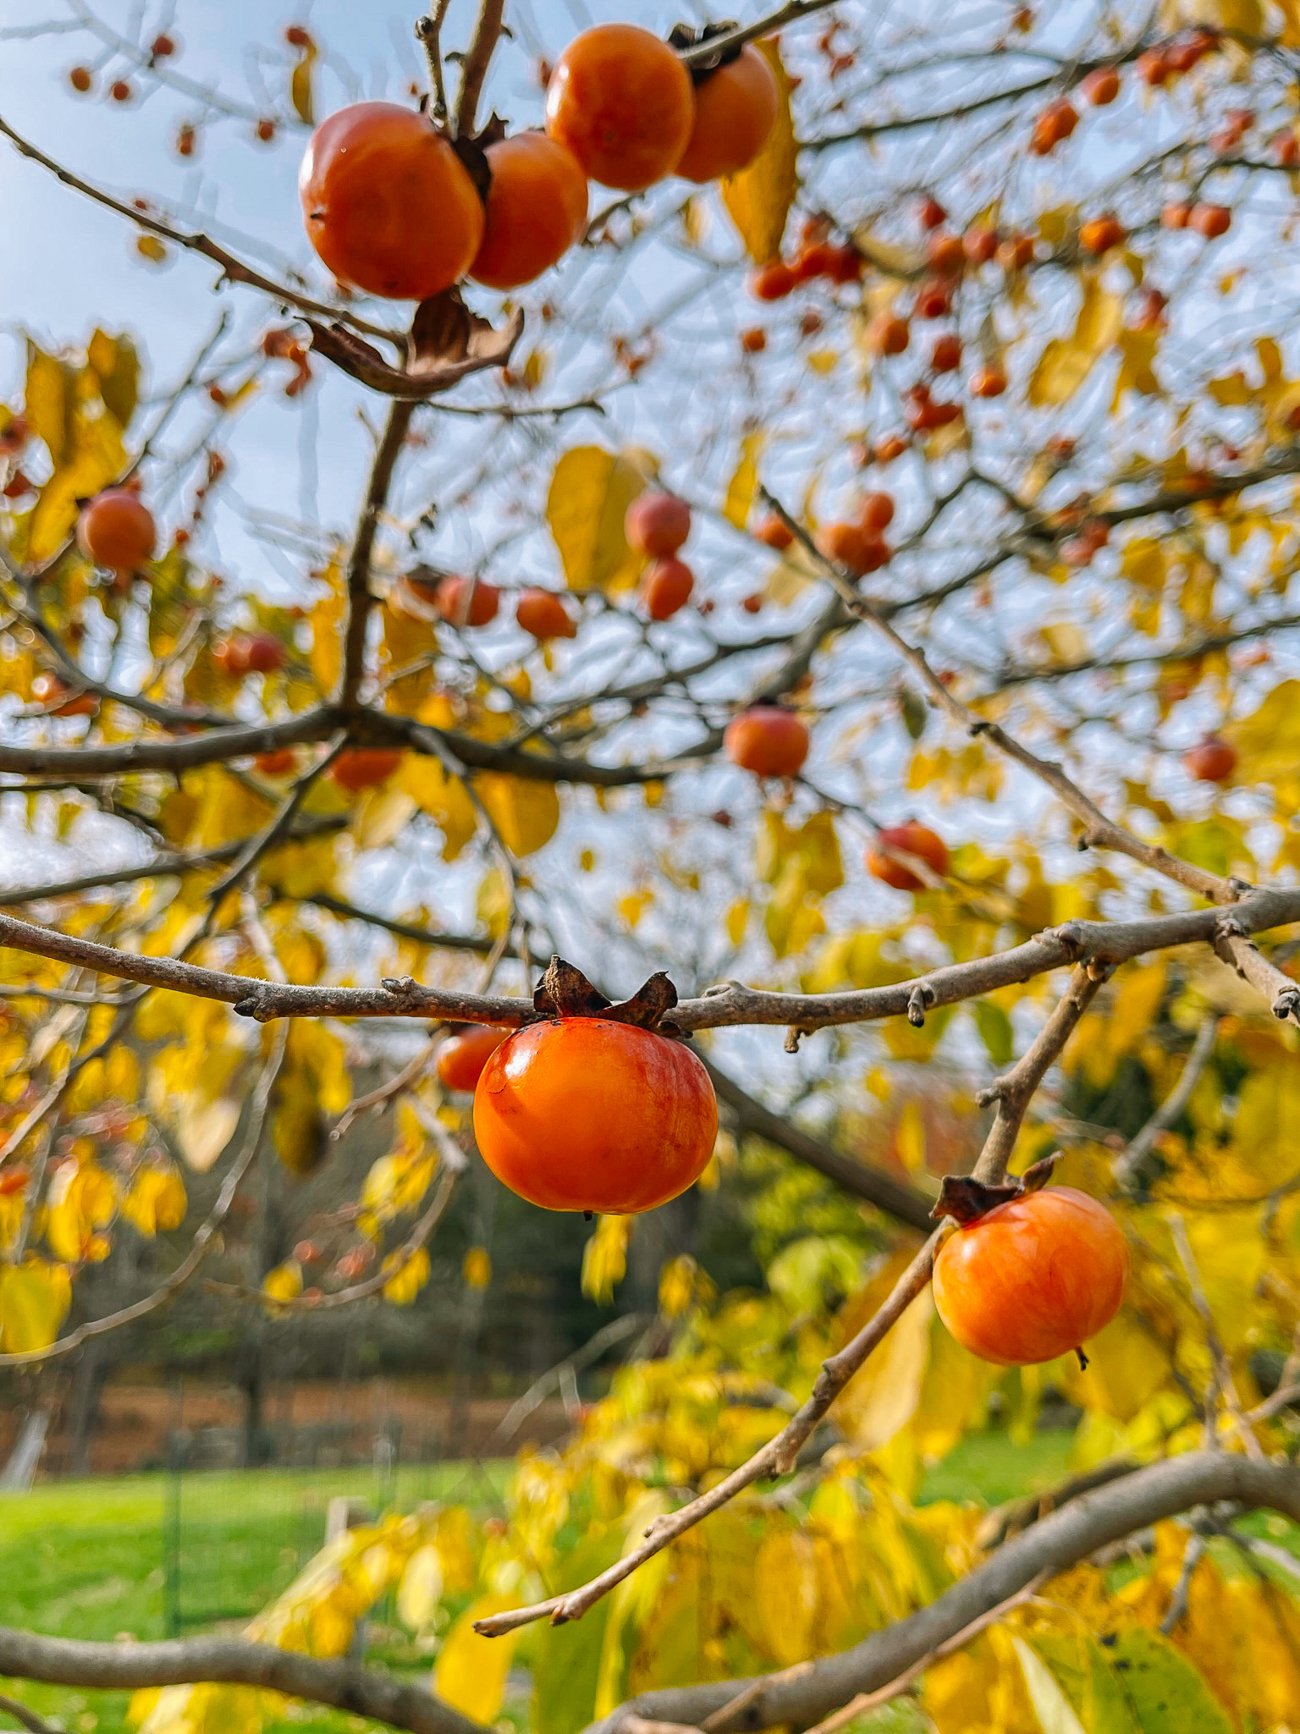 small persimmons on tree